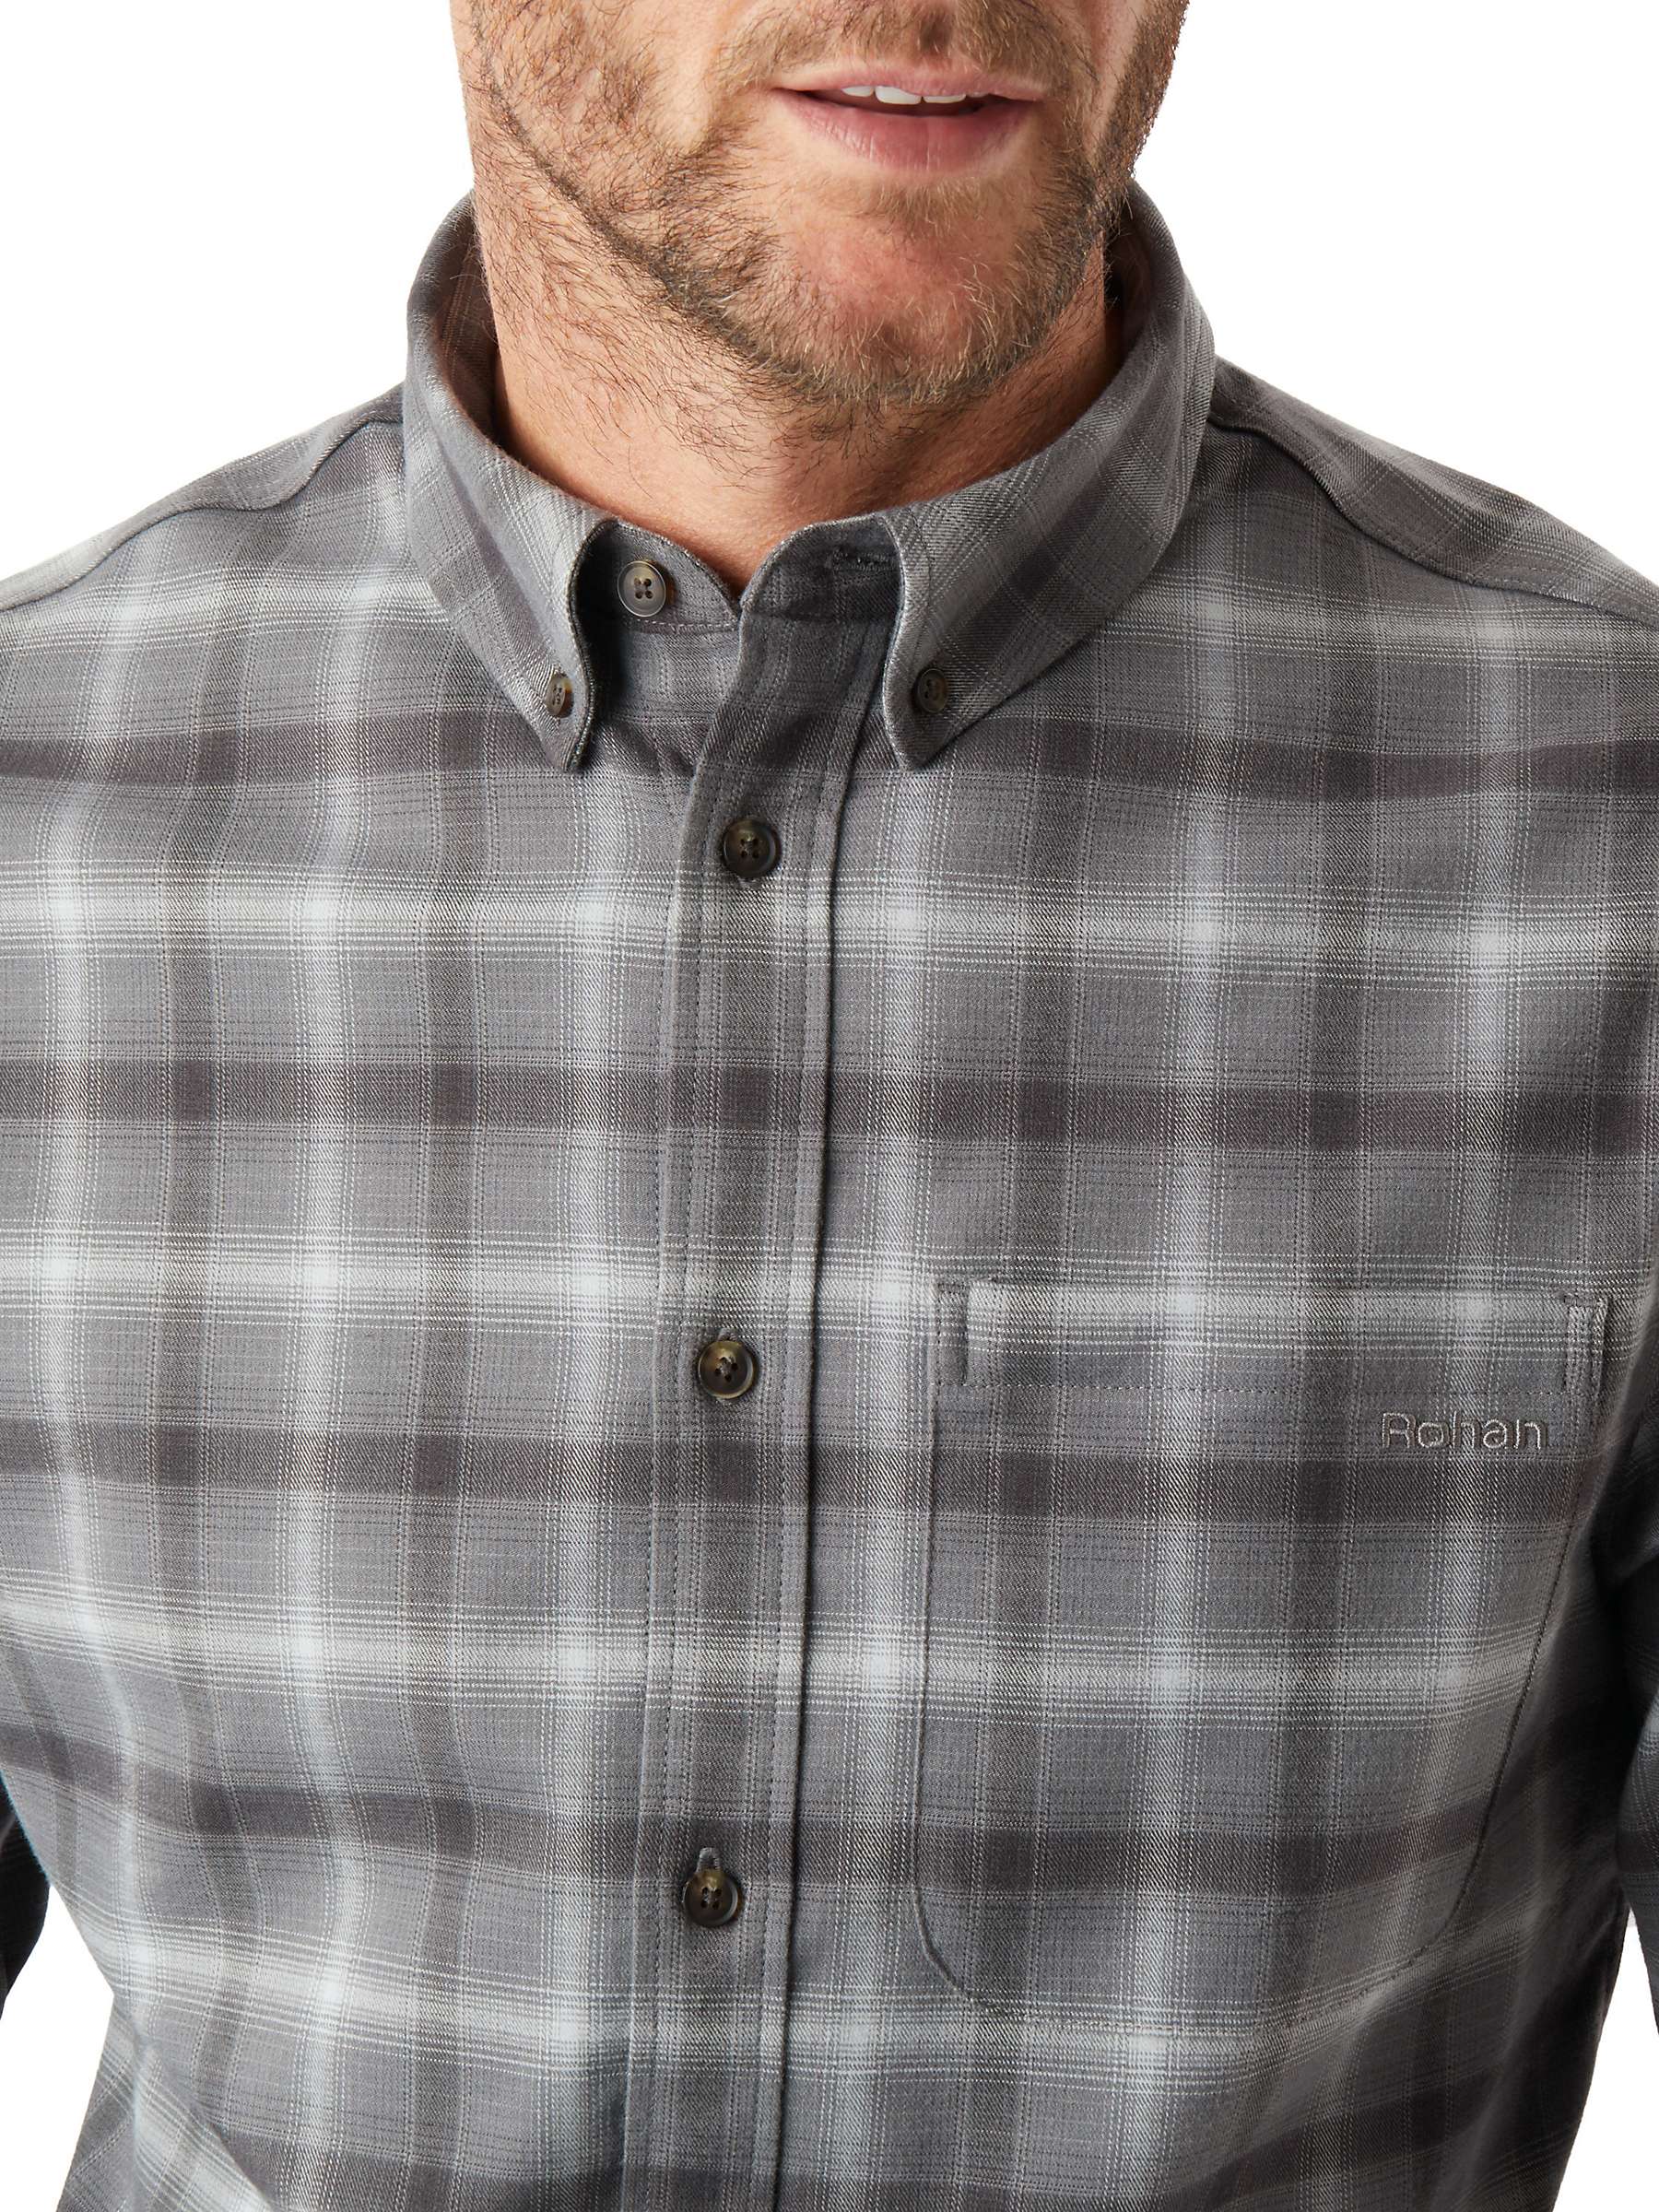 Buy Rohan Dover Long Sleeve Check Shirt Online at johnlewis.com